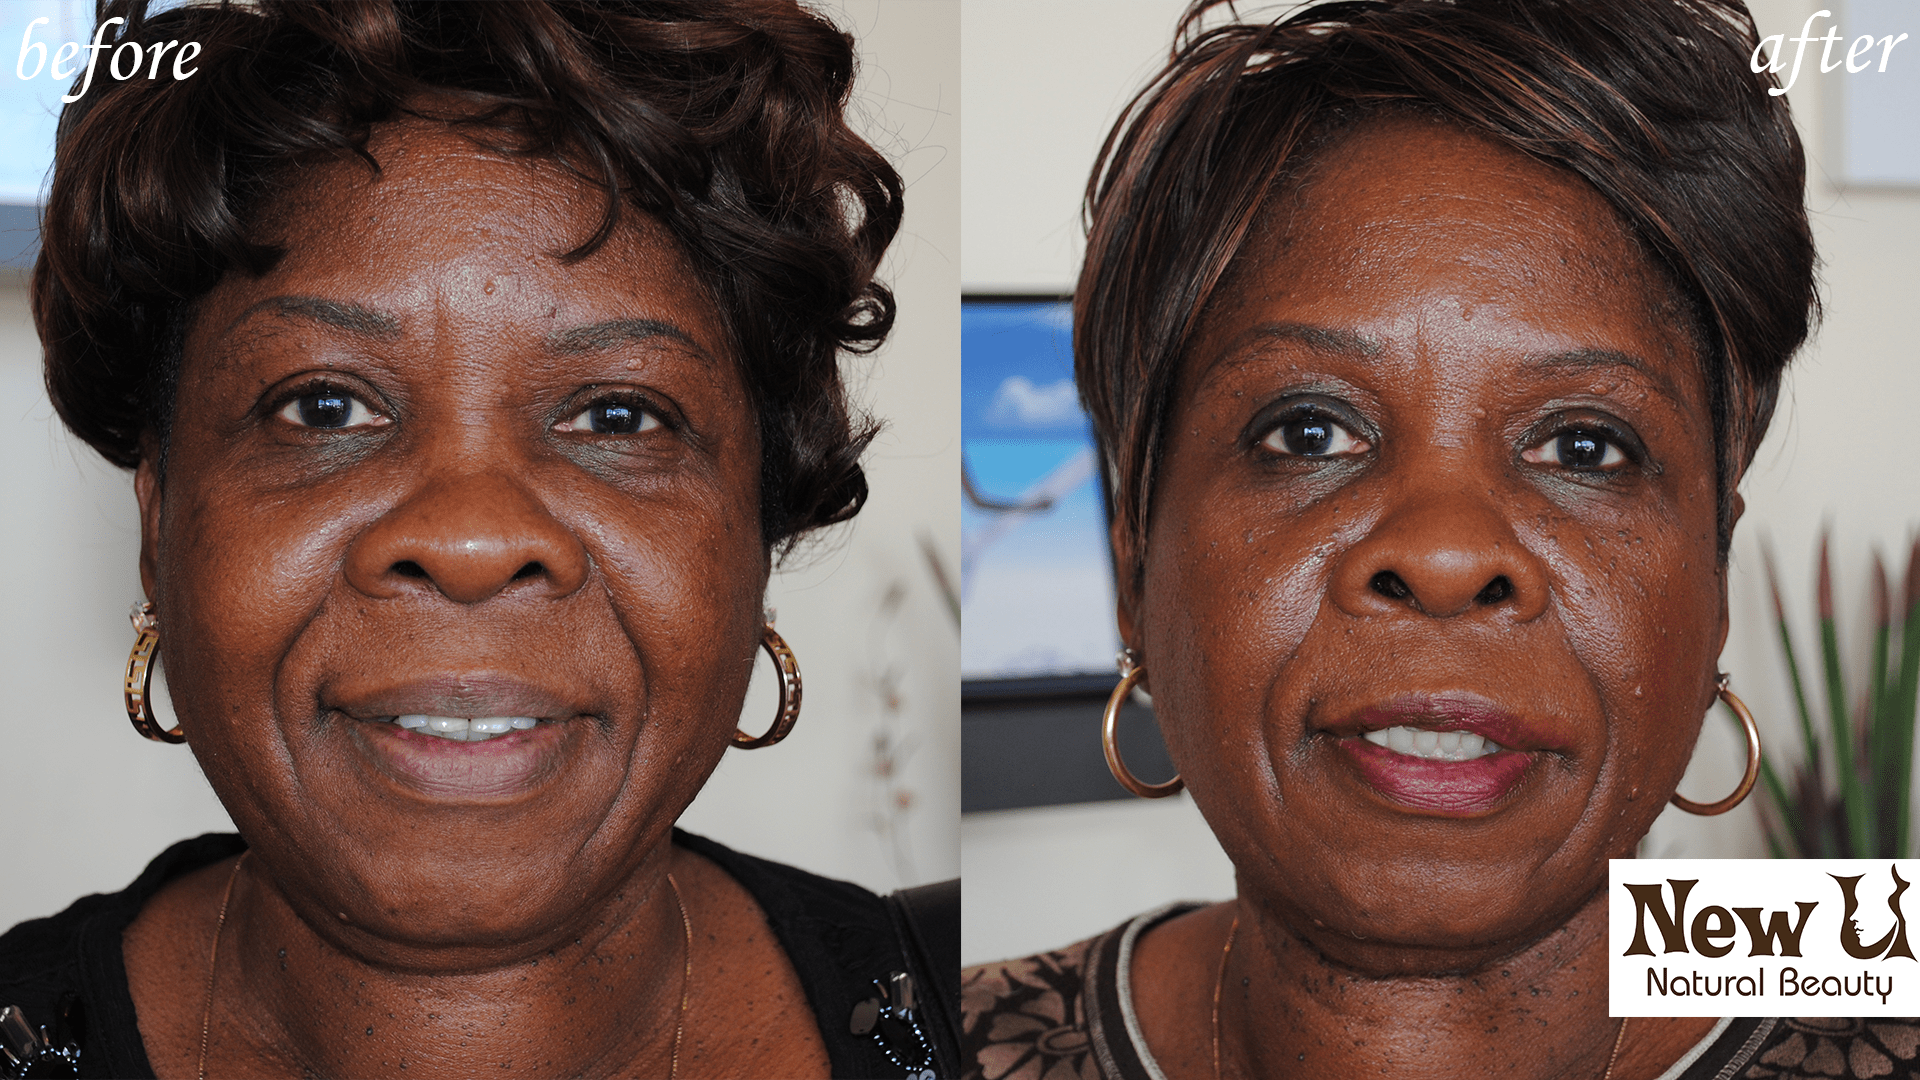 Skin Pigmentation 1 Las Vegas Before and After